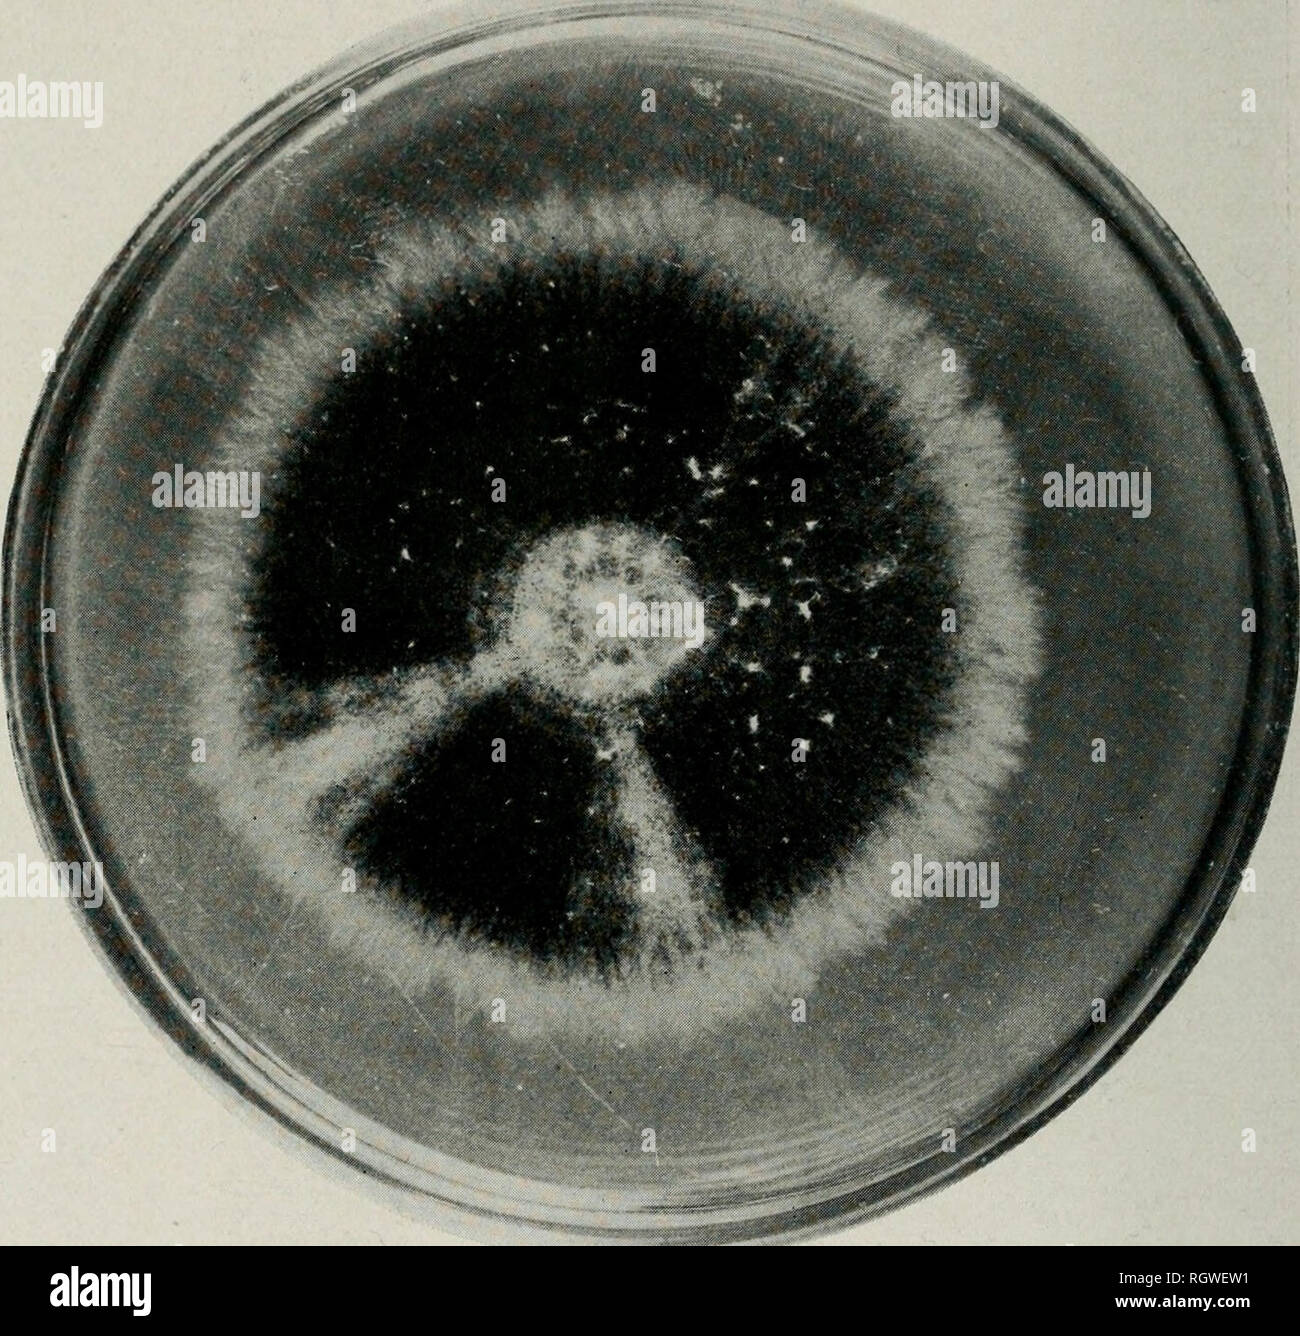 . Bulletin. Natural history; Natural history. 48 ILLINOIS NATURAL HISTORY SURVEY BULLETIN. Fig. 28.—Petri-dish culture of Verticillium alhoatrnm, showing the ap- pearance of the fungus after 12 days on corn meal agar. and Richmond. Its alpha spore range is 5.8—11.7X1.8—3.3 /x but chiefly 7.3—8:8X3.3—3.5 /x, and the beta spores are mostly 33.3X1 ^. The Dutch Phomopsis, according to Buisman, has alpha spores which are generally 7.1X3.4 and stylospores 35X1 ^. The Phomopsis studied by Richmond has alpha spores 6.5—8.3x3.7—3.5 ^ and stylospores 33.7—37.5X.98—1.3 /x. VERTICILLIUM WILT The wilt due  Stock Photo